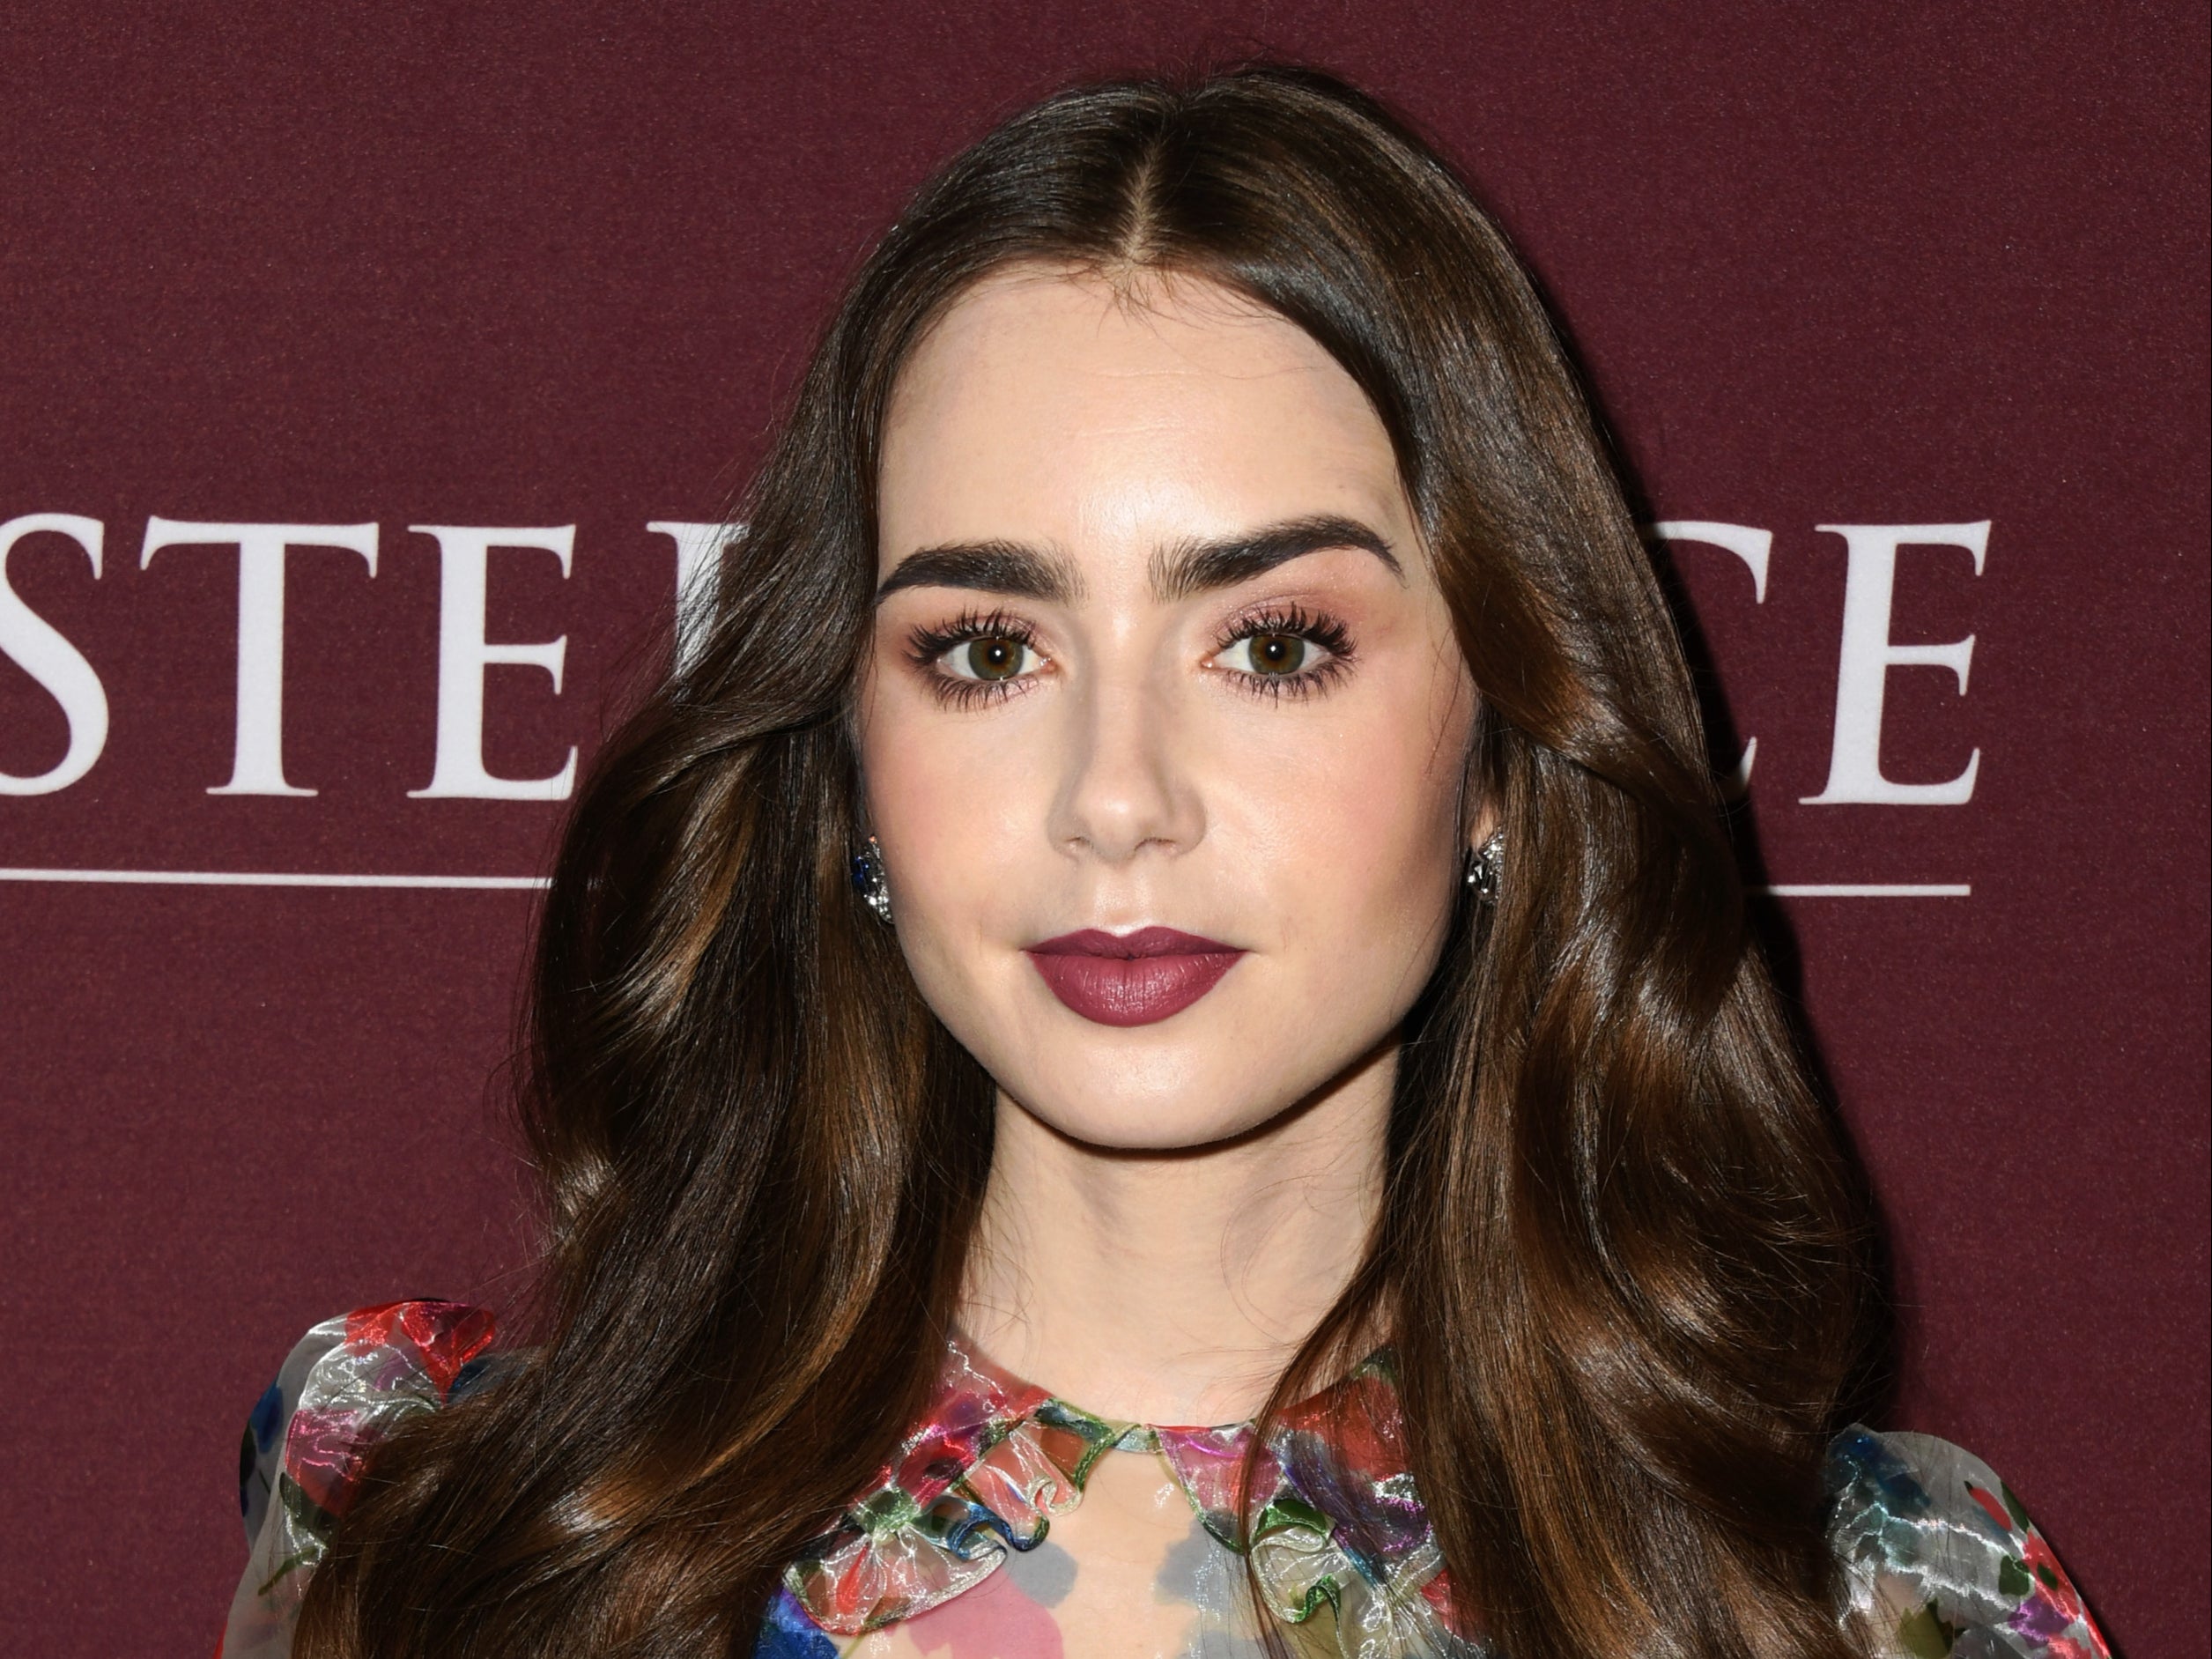 Lily Collins attends Les MisÃ©rables Photo Call at Linwood Dunn Theater on 8 June 2019